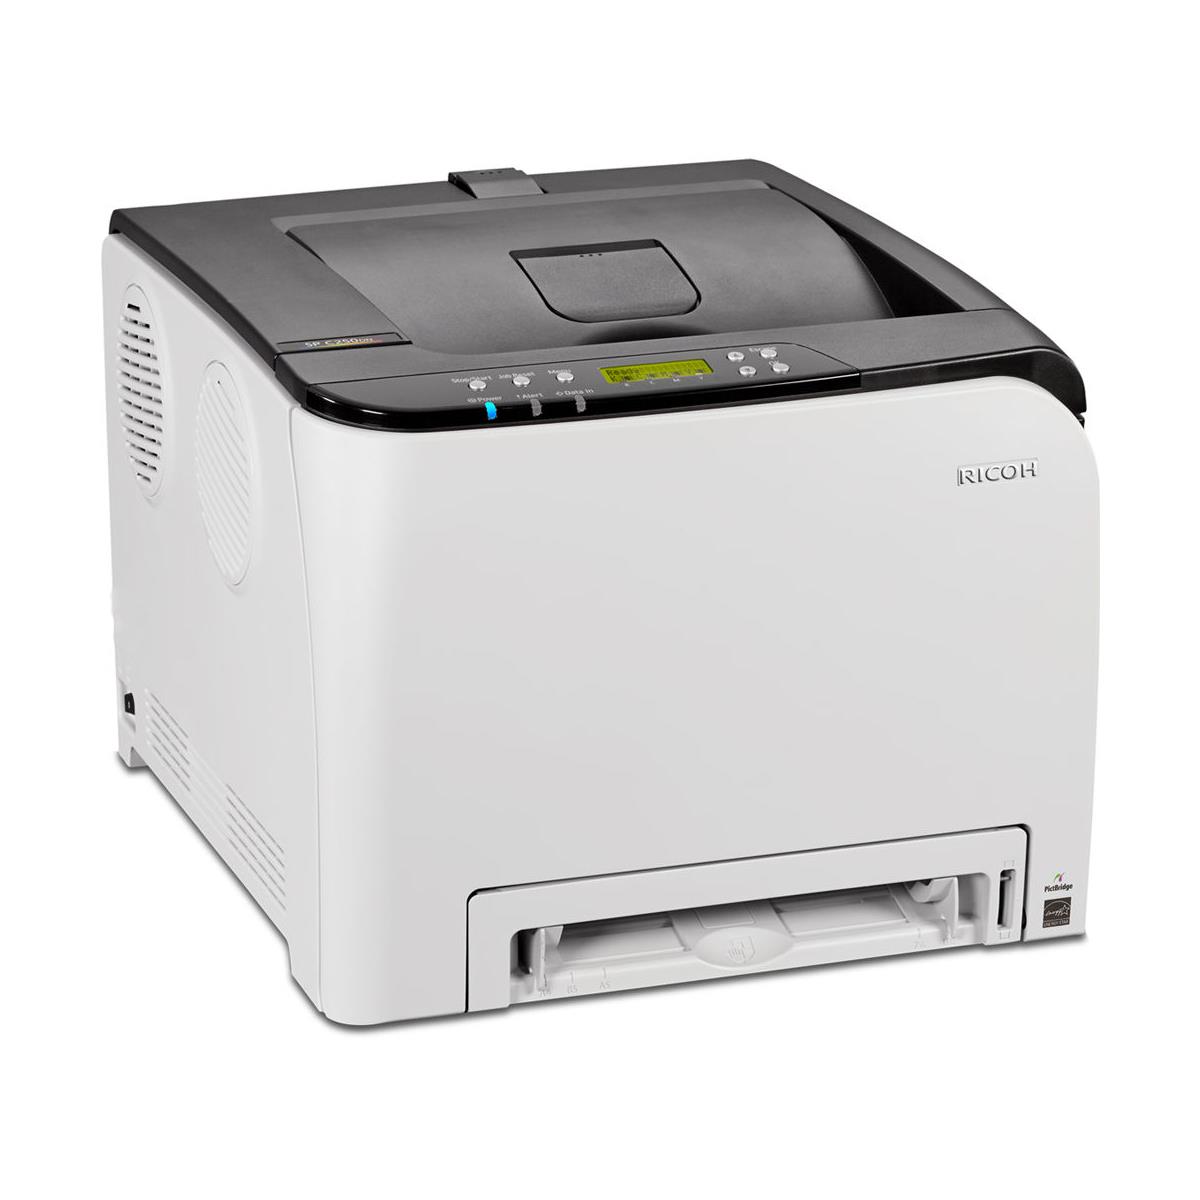 Ricoh SP C250 color wireless laser printer for $70, free shipping